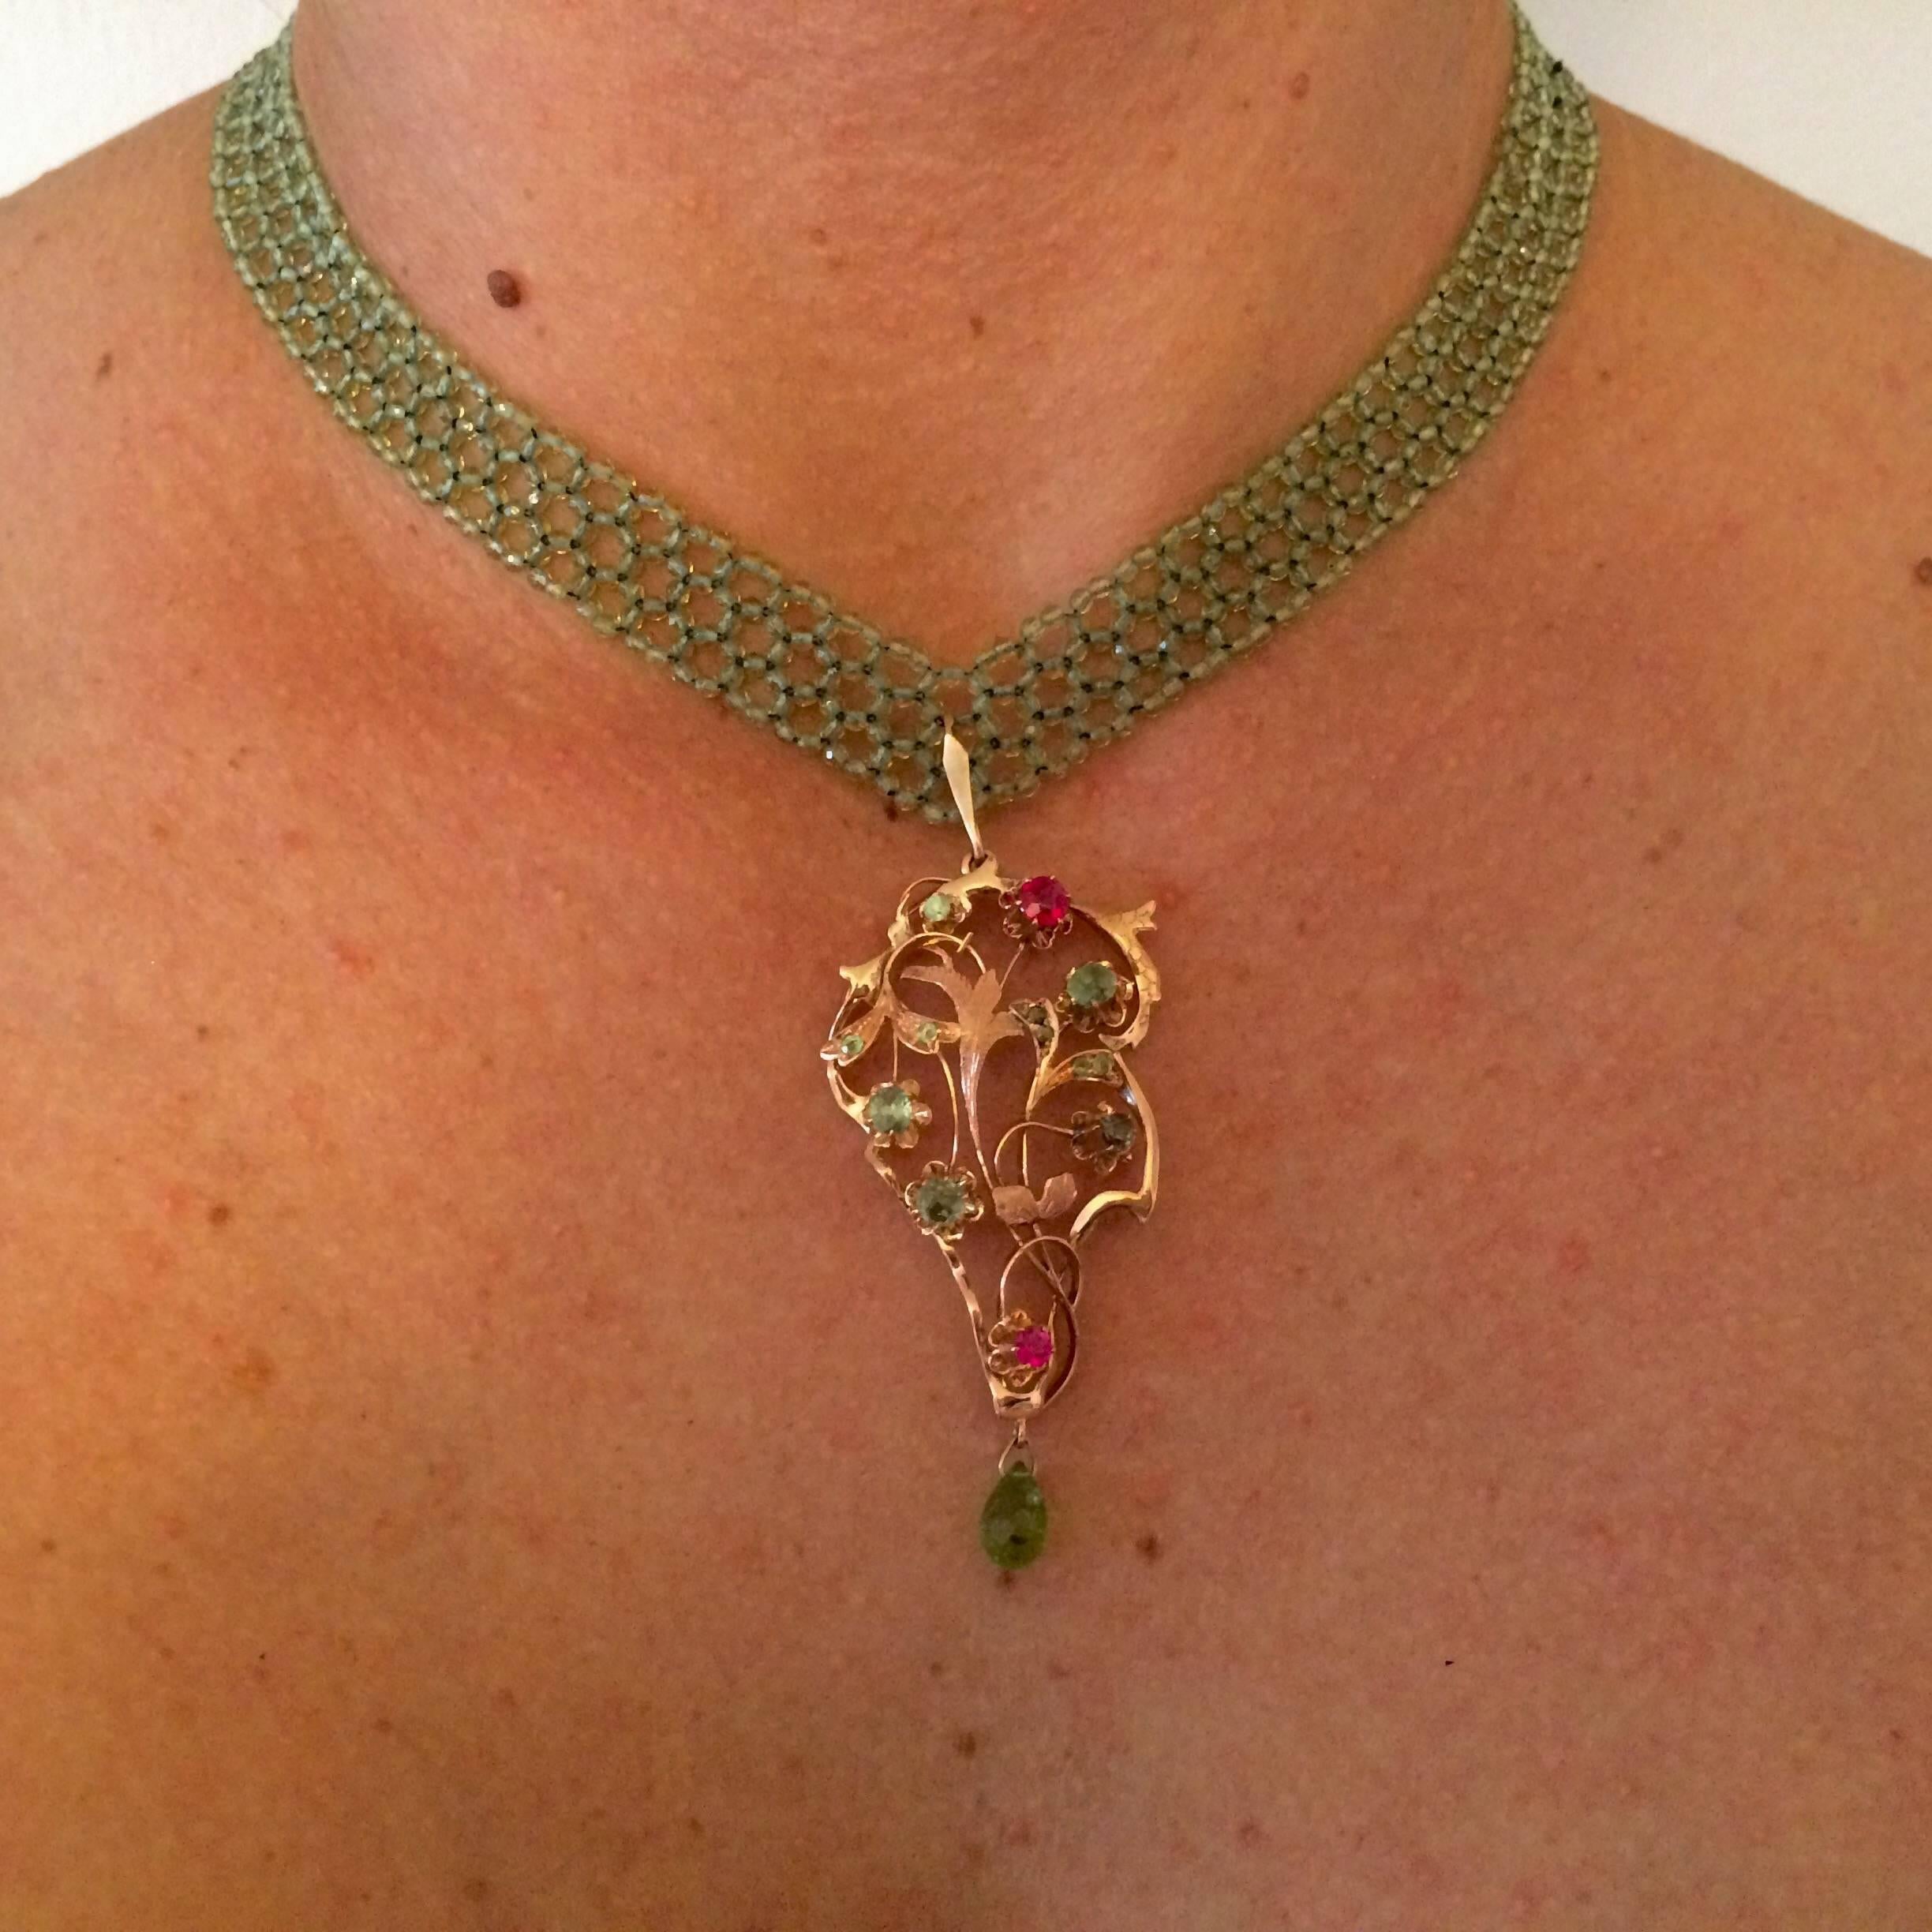 Woven Peridot Bead Necklace with Removable Pendant of Ruby, Peridot and Gold In New Condition For Sale In Los Angeles, CA